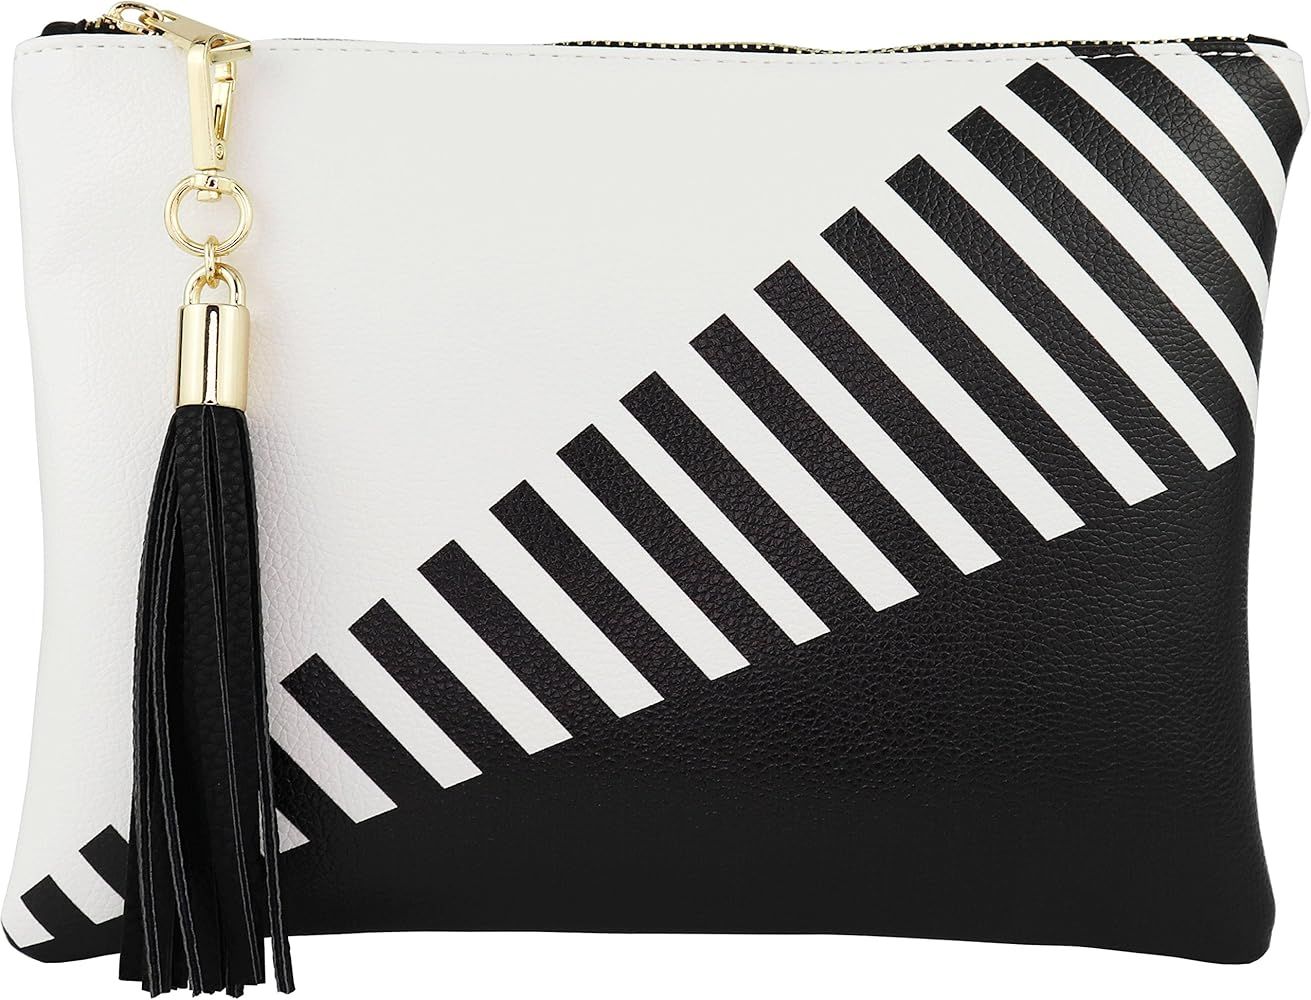 B BRENTANO Vegan Clutch Bag Pouch with Tassel Accent | Amazon (US)